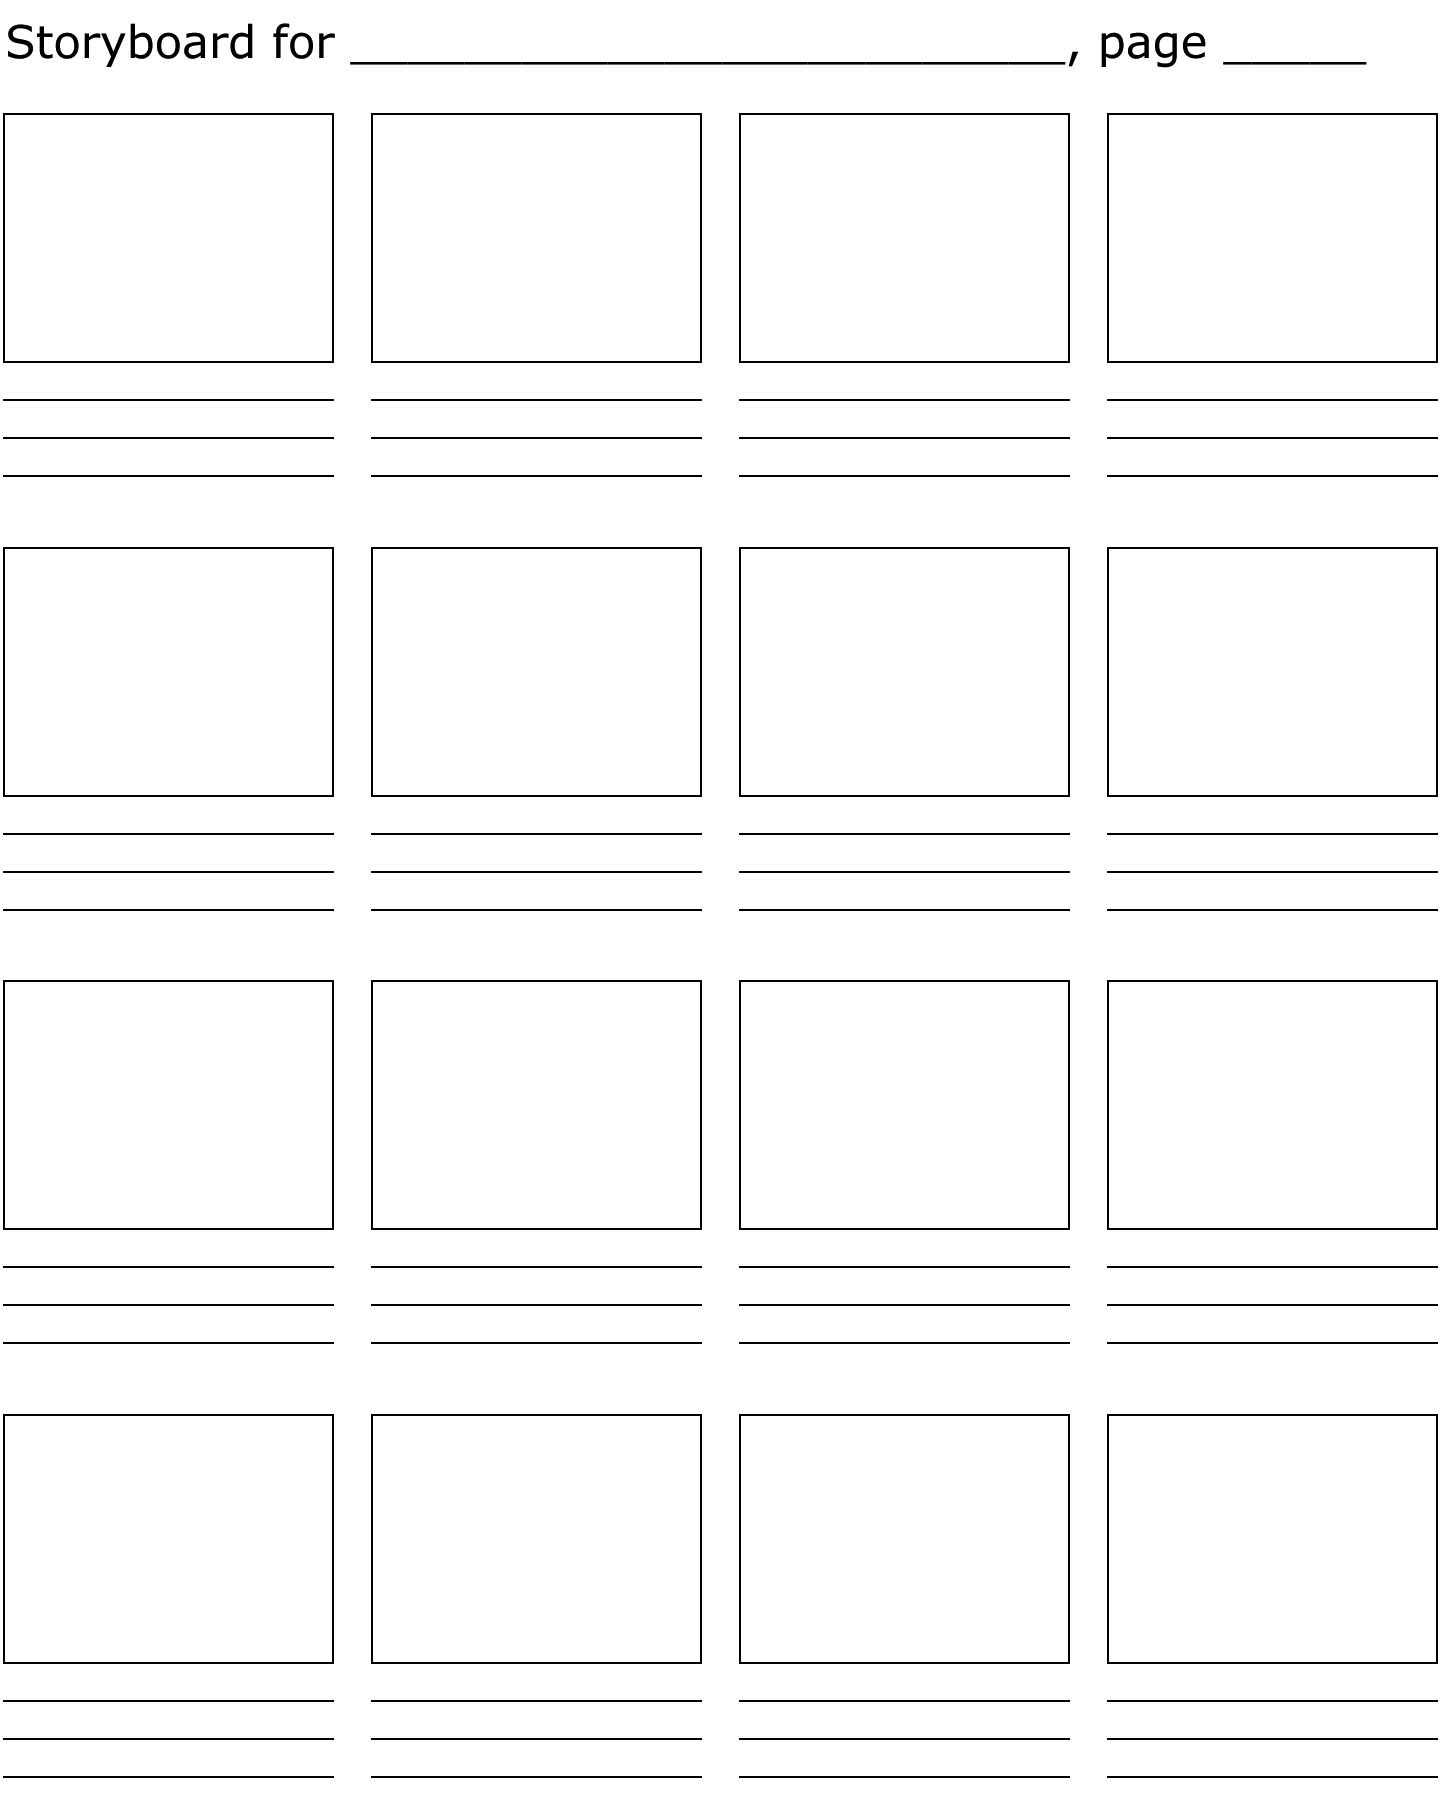 Free Storyboard Printable Download Free Storyboard Printable Png Images Free ClipArts On 